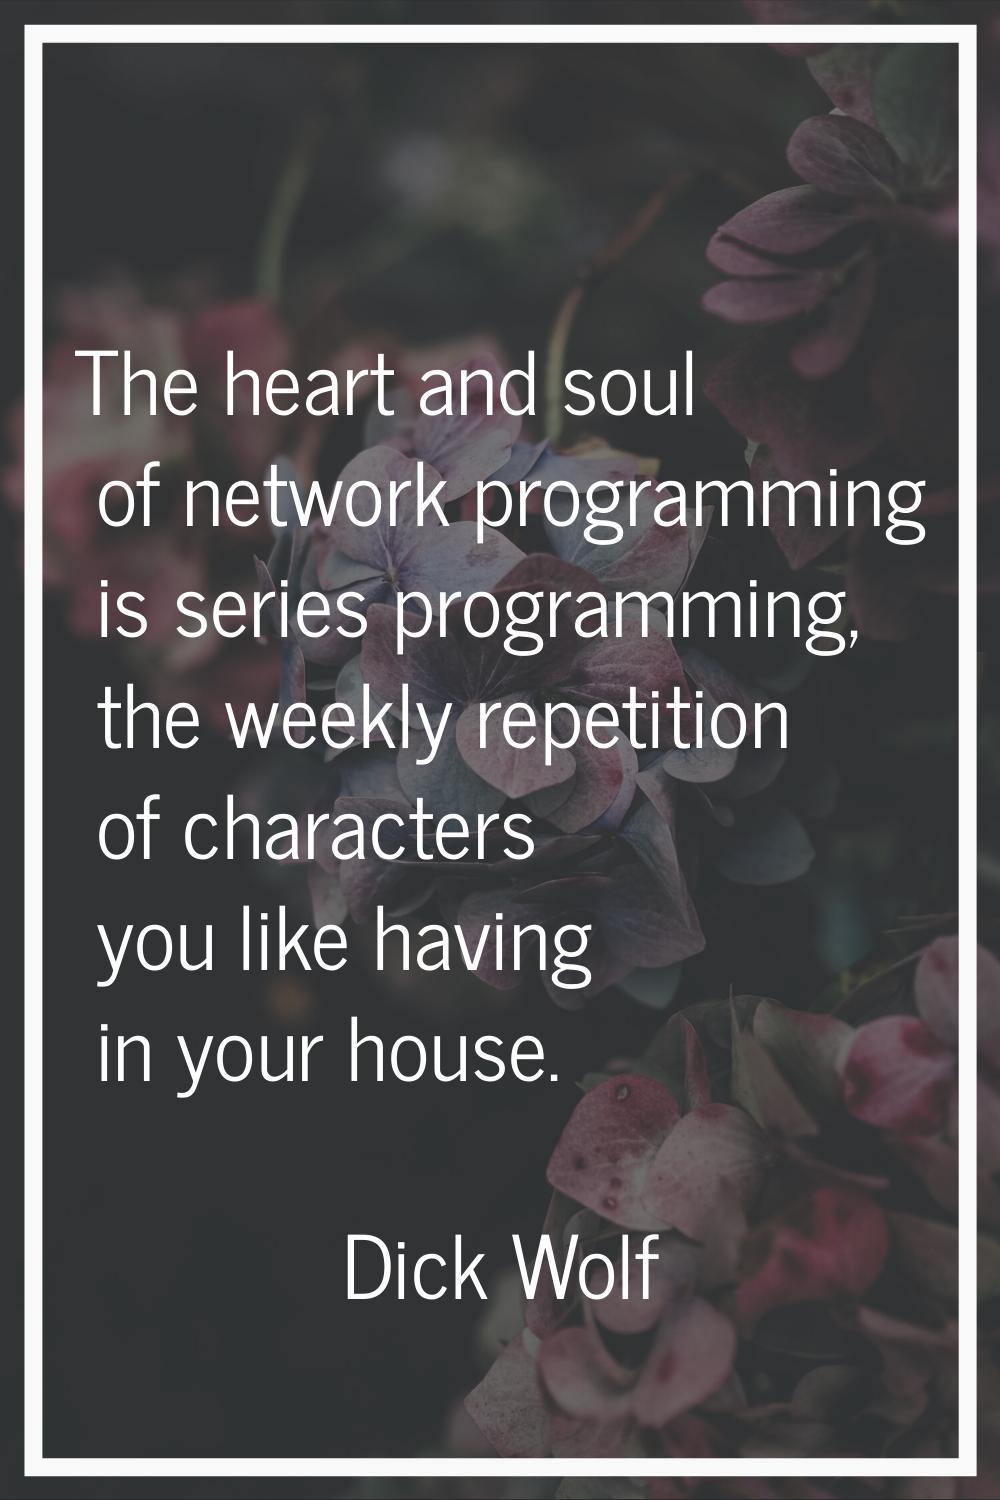 The heart and soul of network programming is series programming, the weekly repetition of character